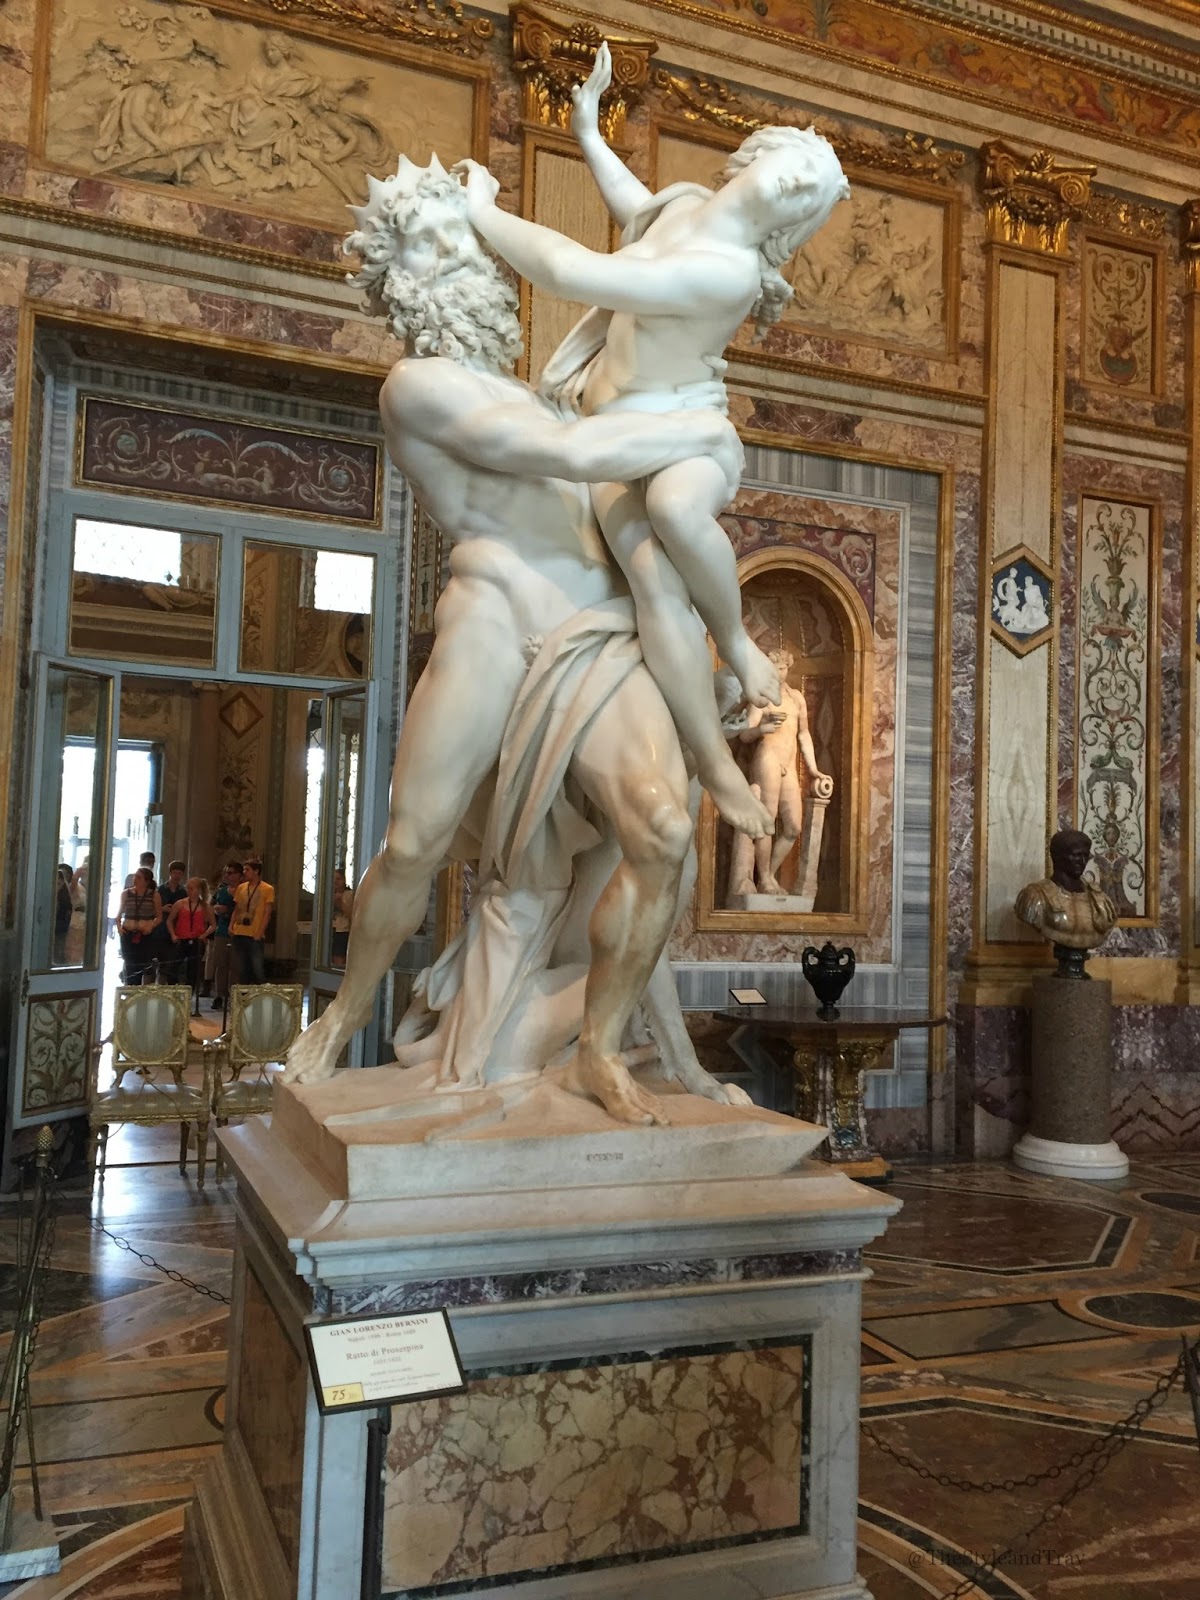 Exploring At The Galleria Borghese - Chic Delights